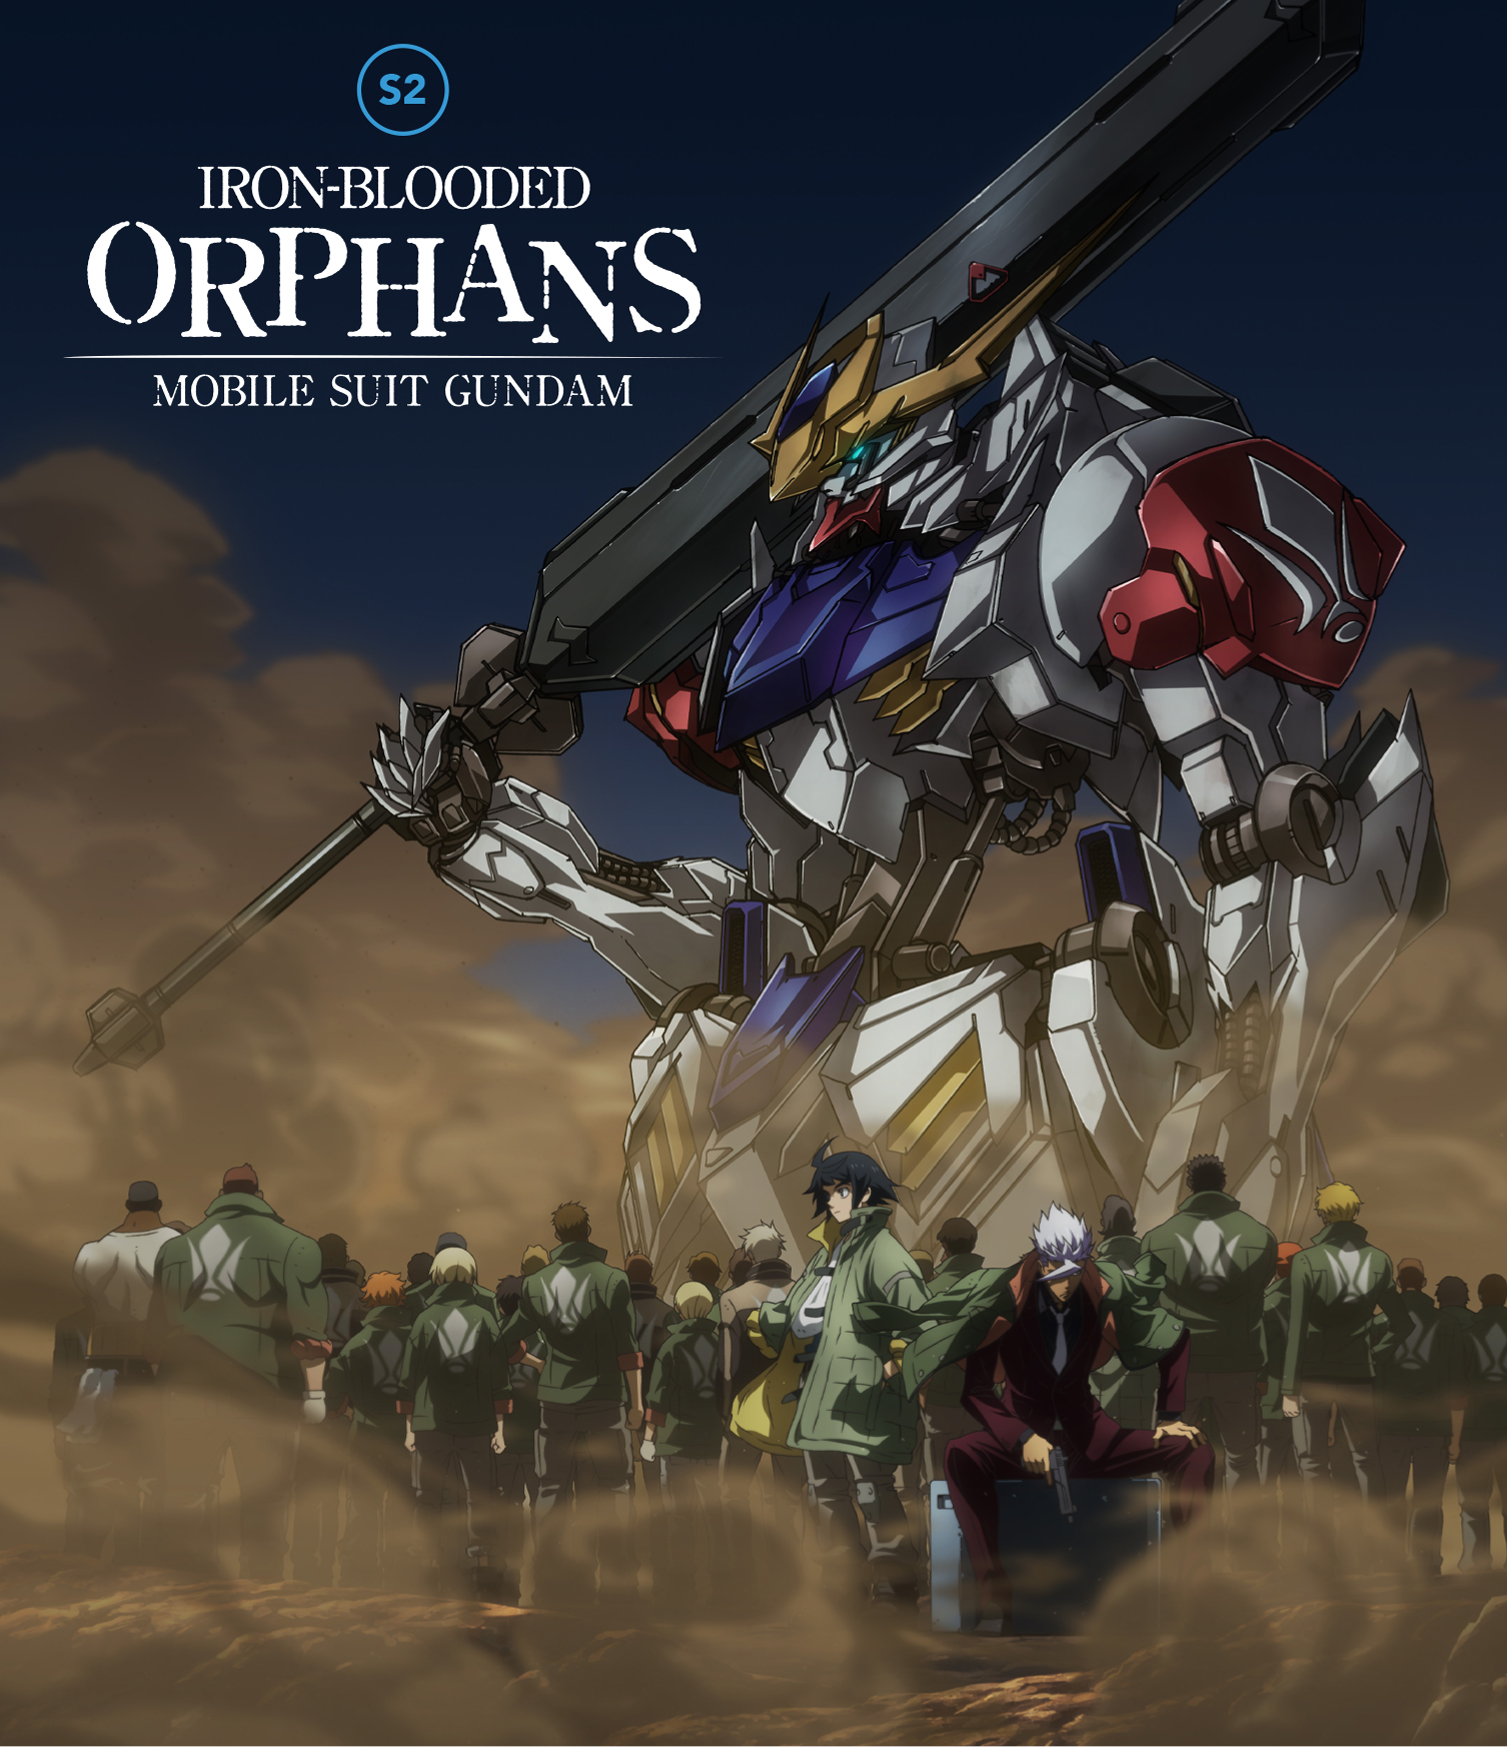 Mobile Suit Gundam: Iron-Blooded Orphans Season Two [Blu-ray] - Best Buy